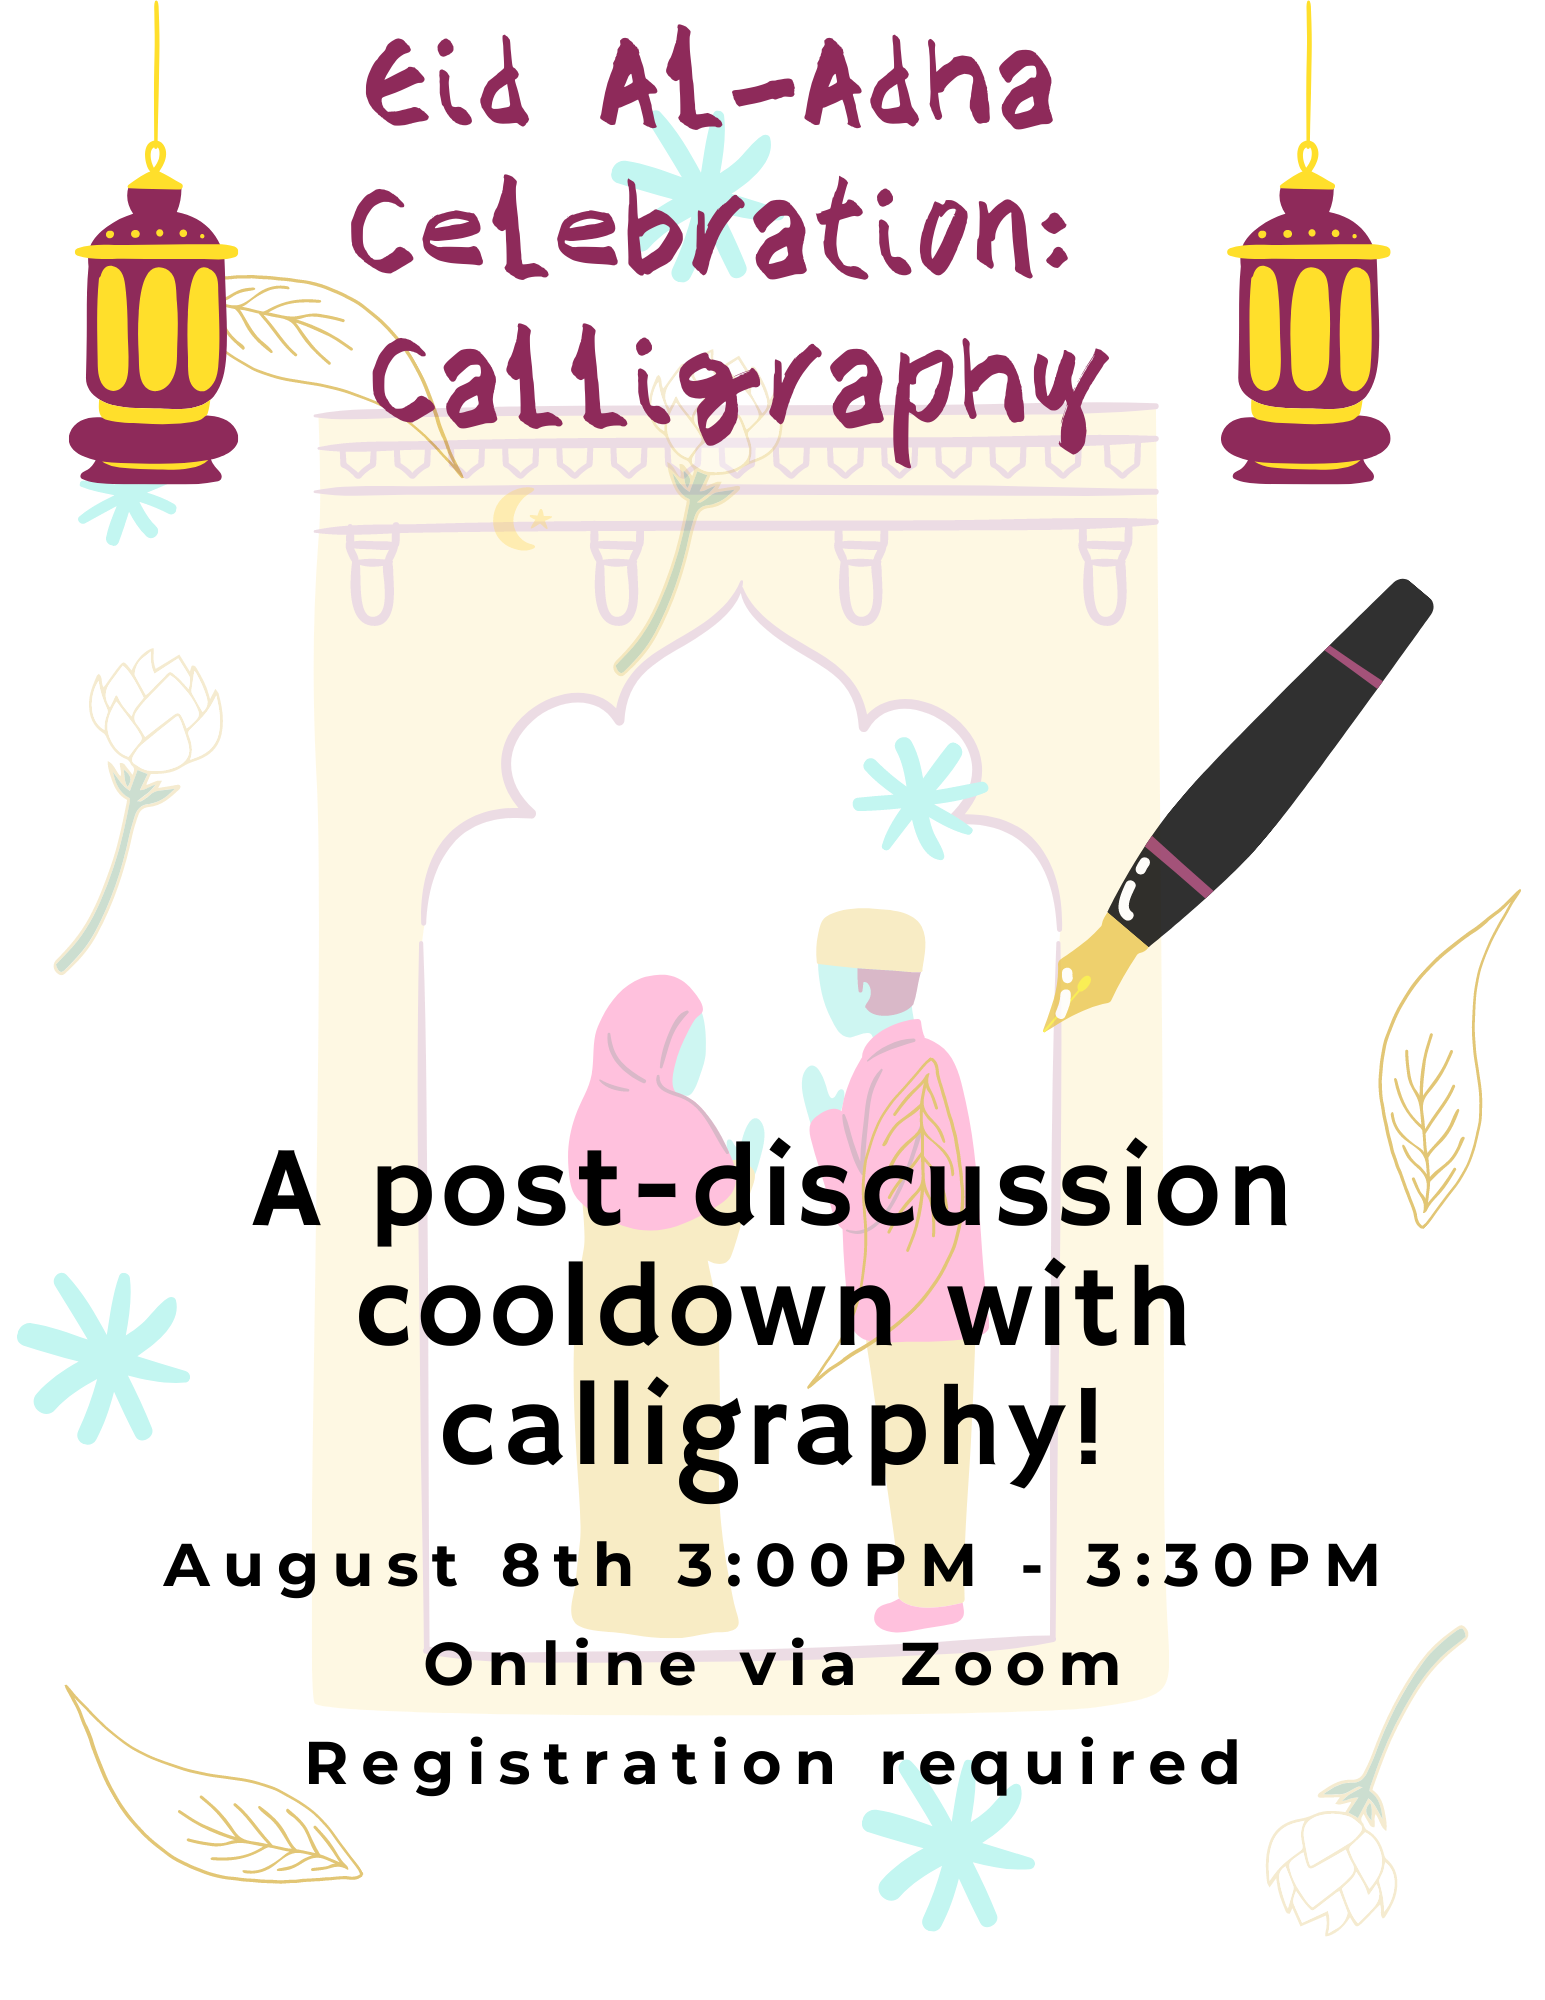 Join us for a post-discussion cool down, filled with calligraphy!